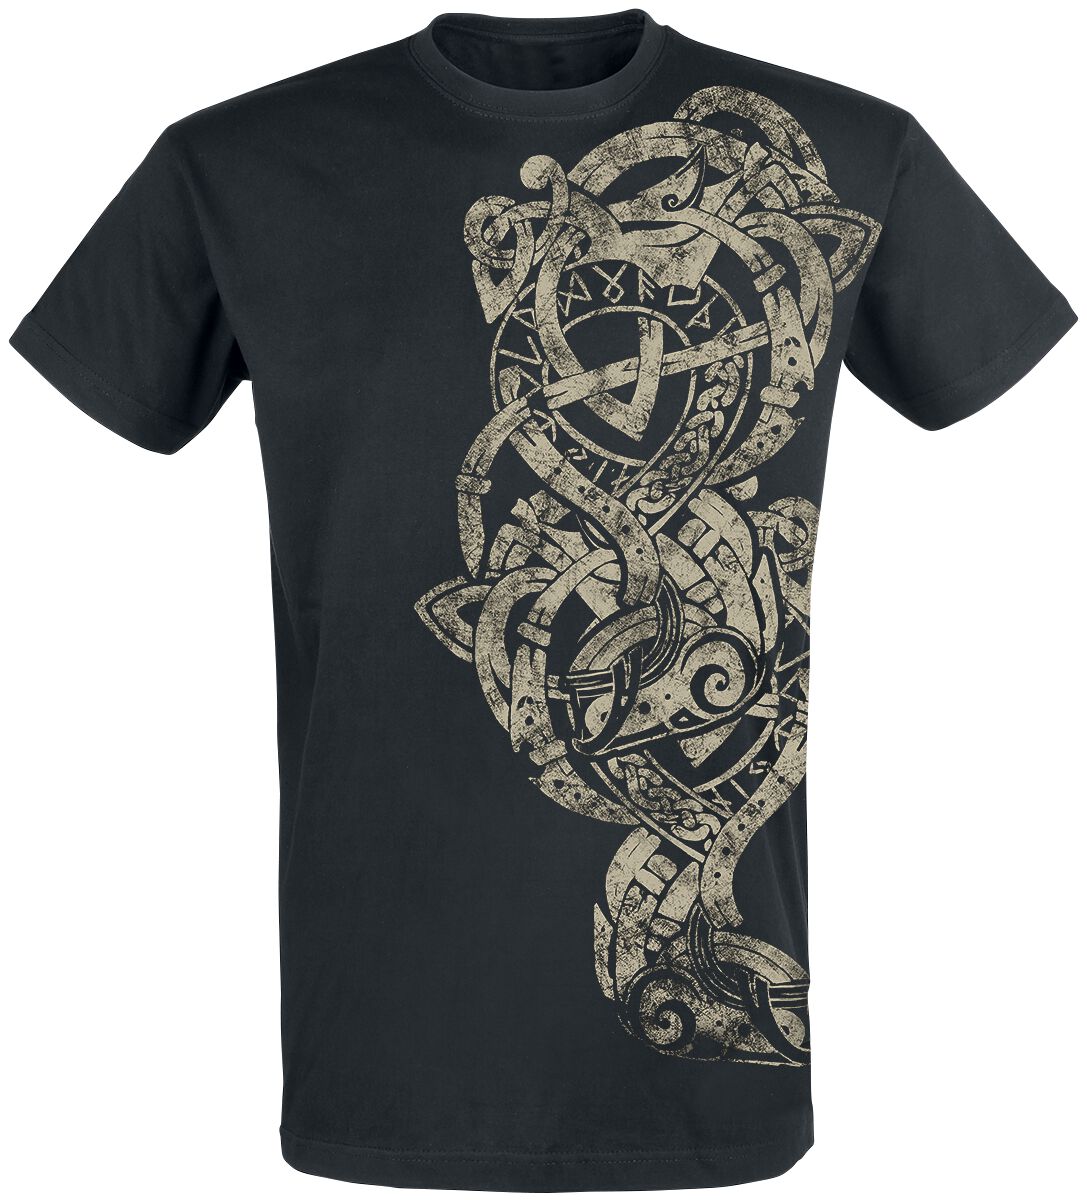 Outer Vision Tattoo T-Shirt schwarz in M 13565-OV